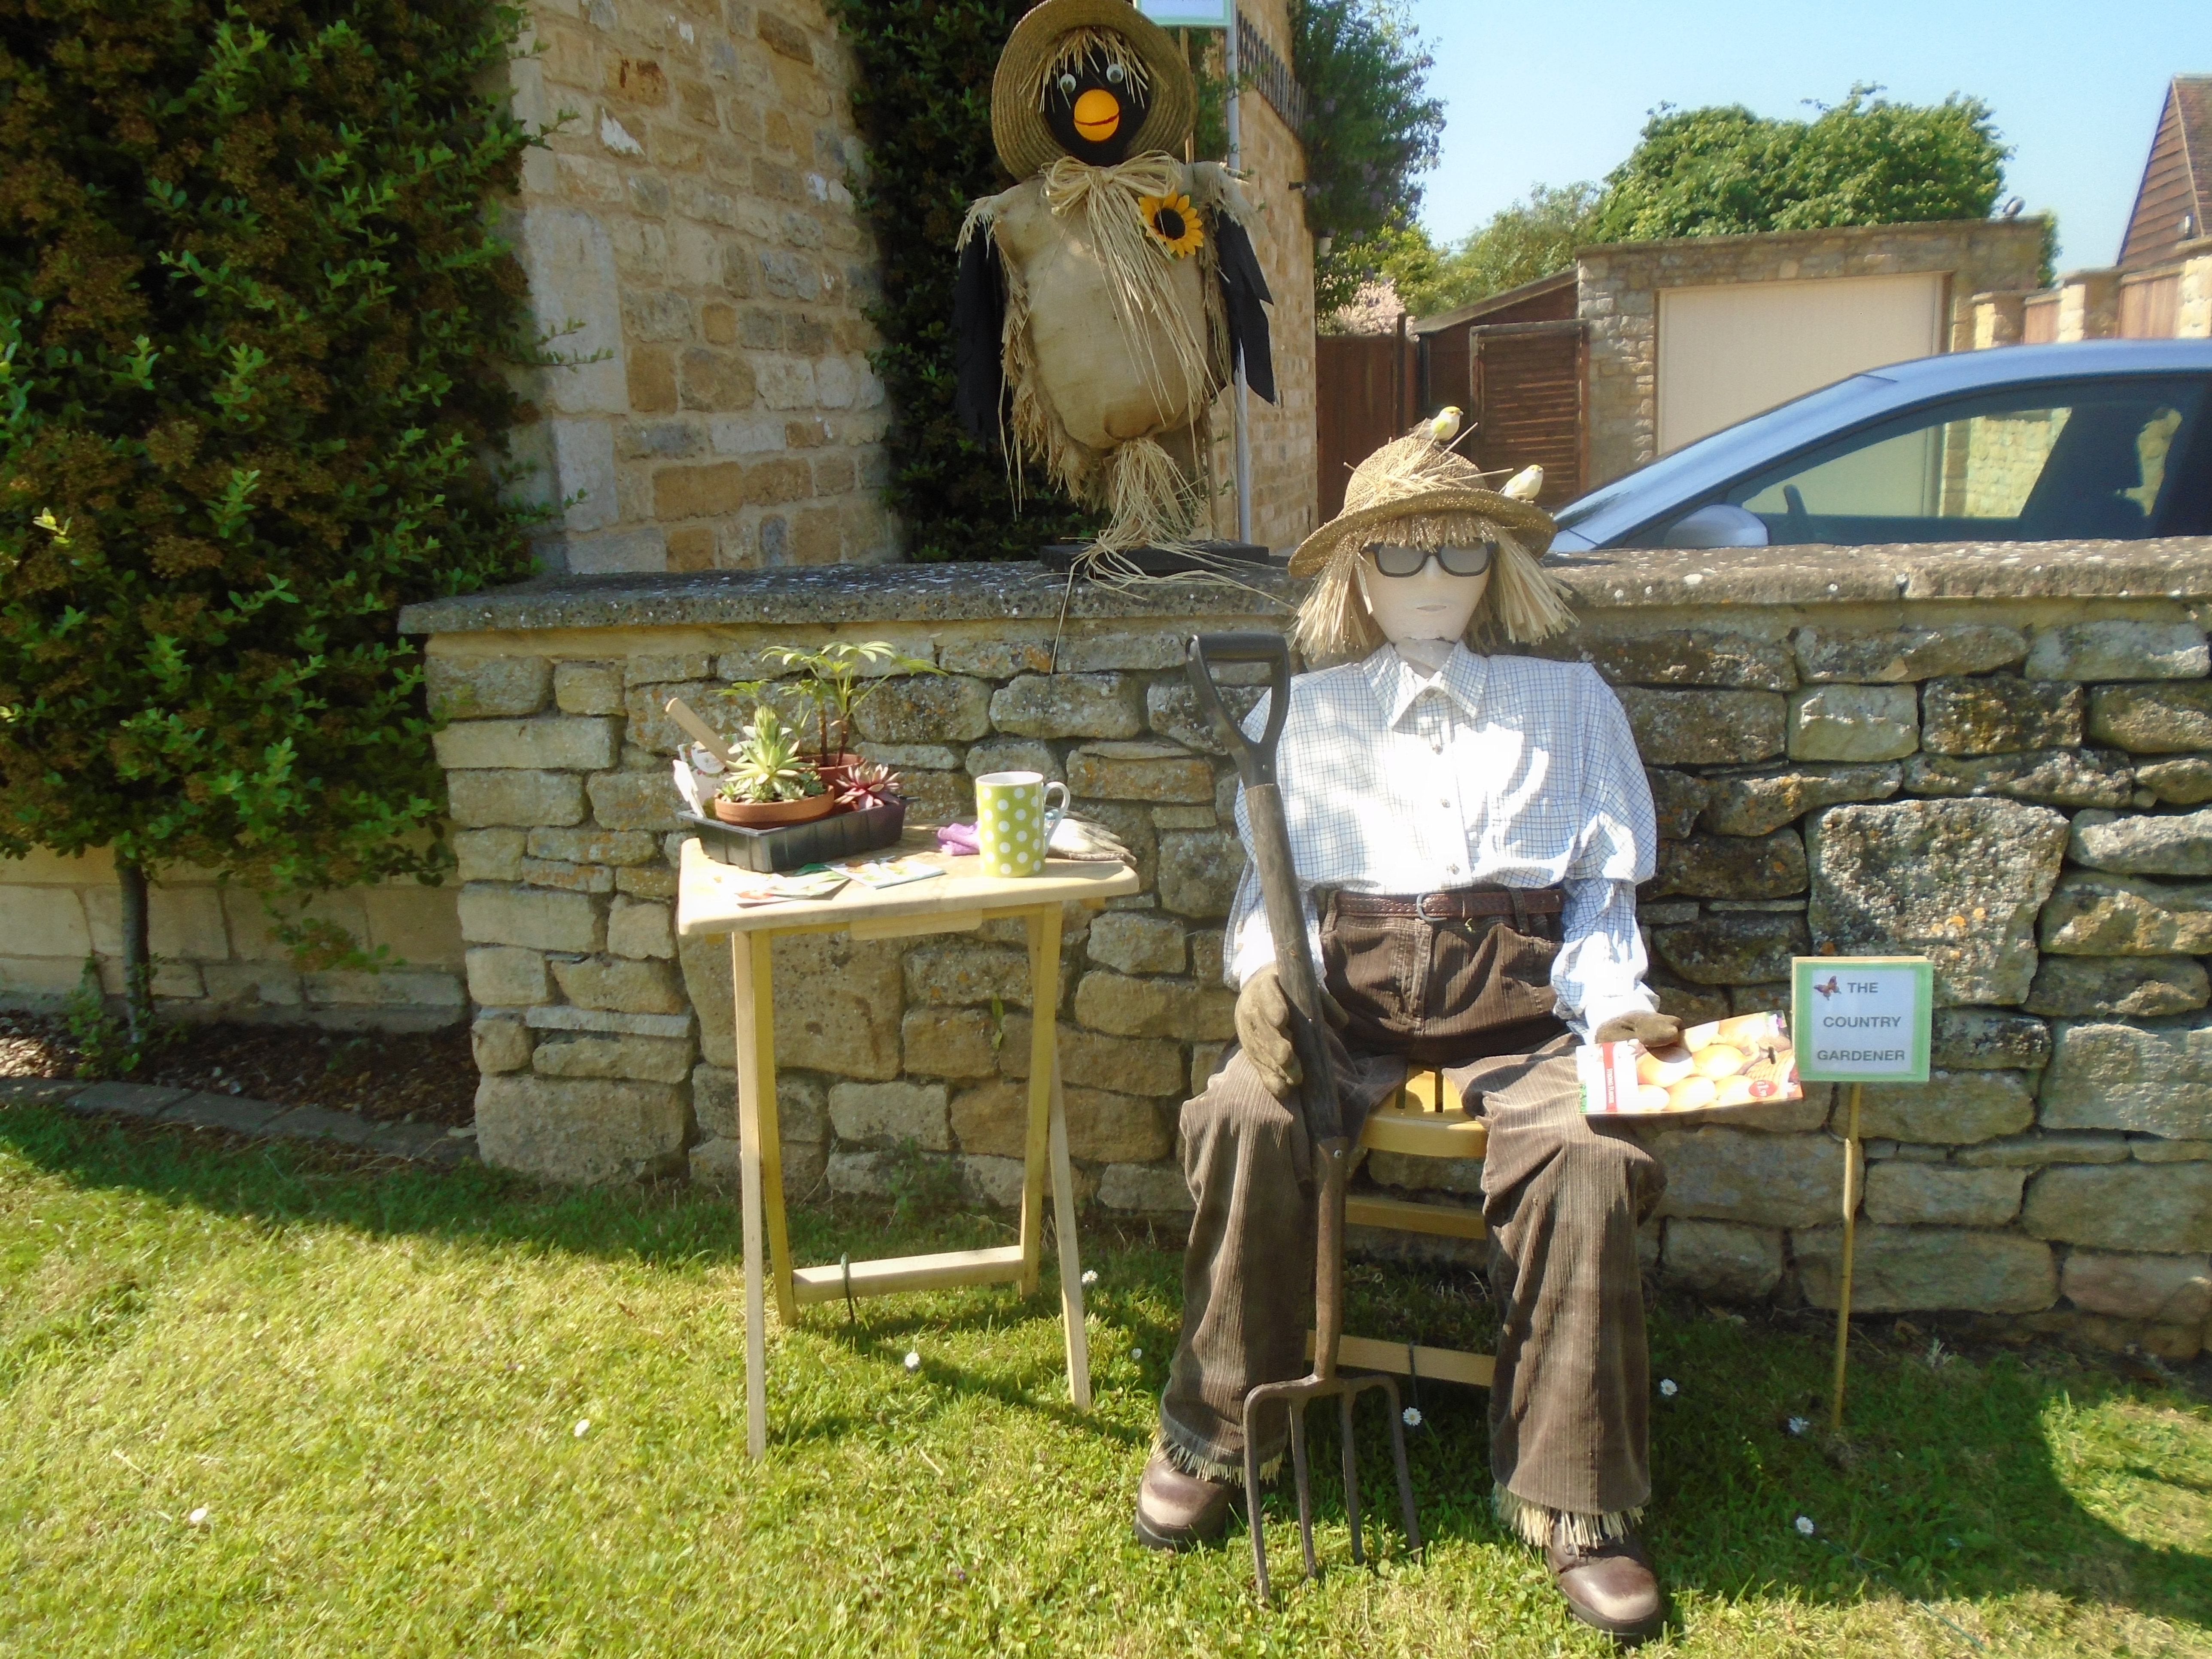 Willersey Scarecrows 202203 The Country Gardener